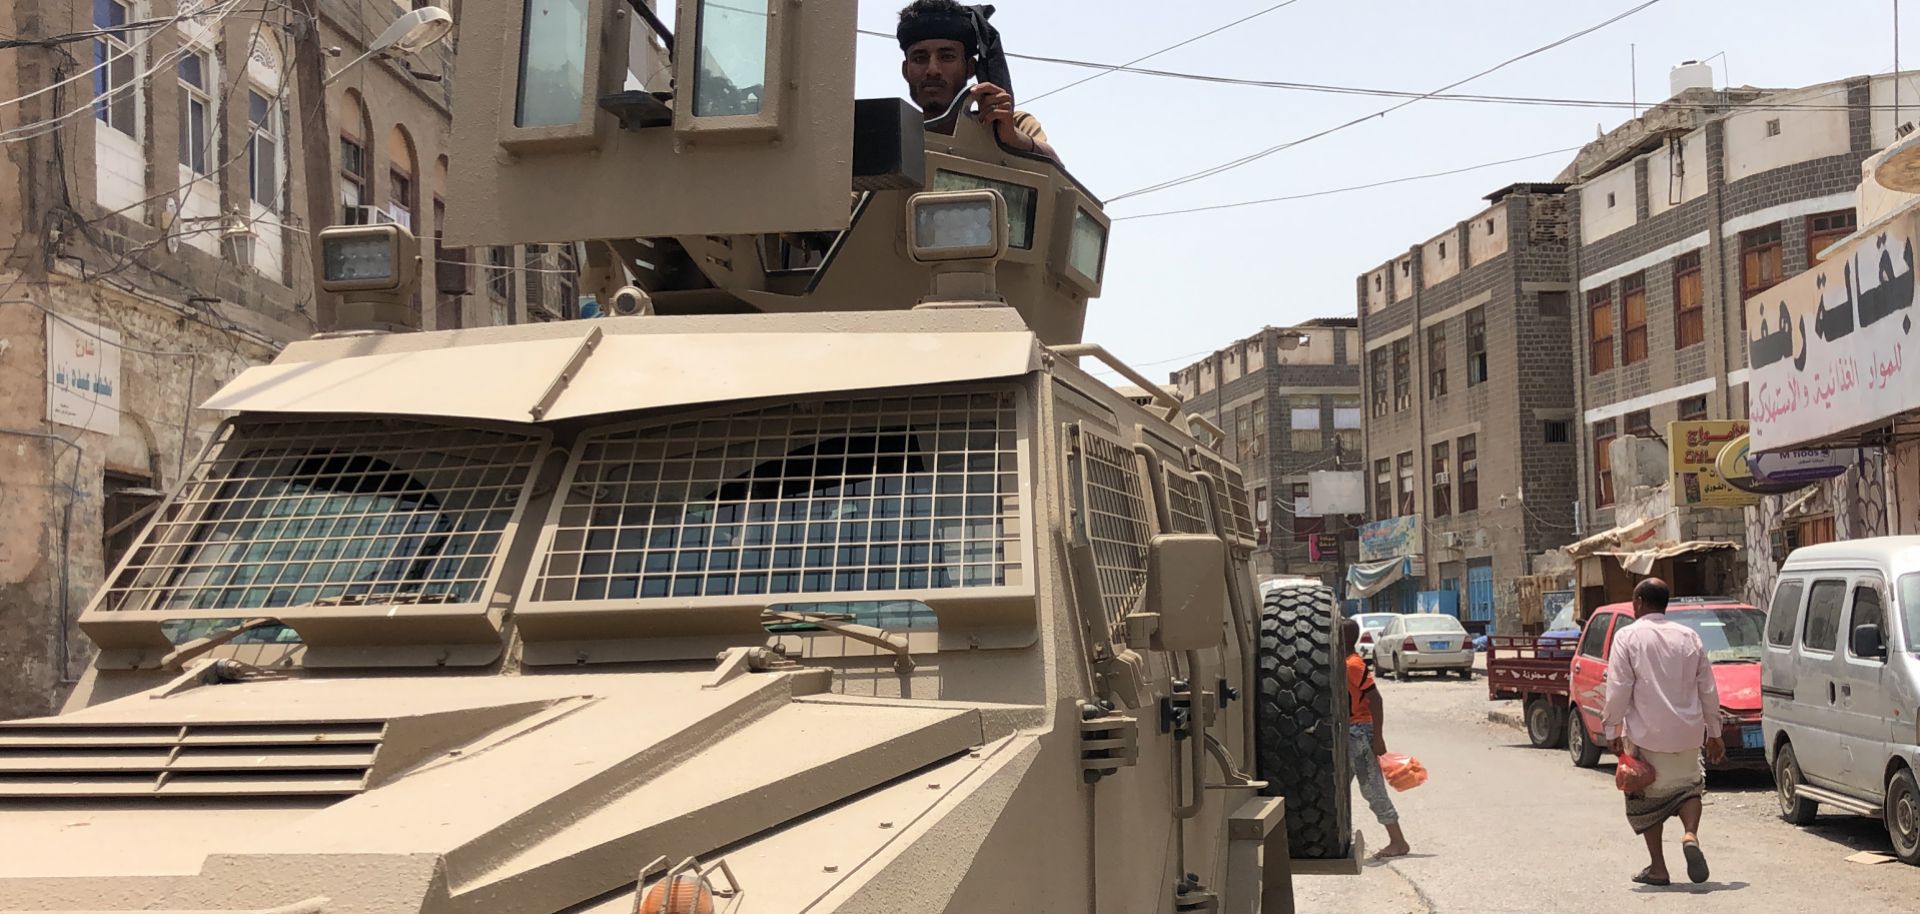 A member of the southern separatist movement rides an armored military vehicle in Aden, Yemen, on Aug. 11, 2019.